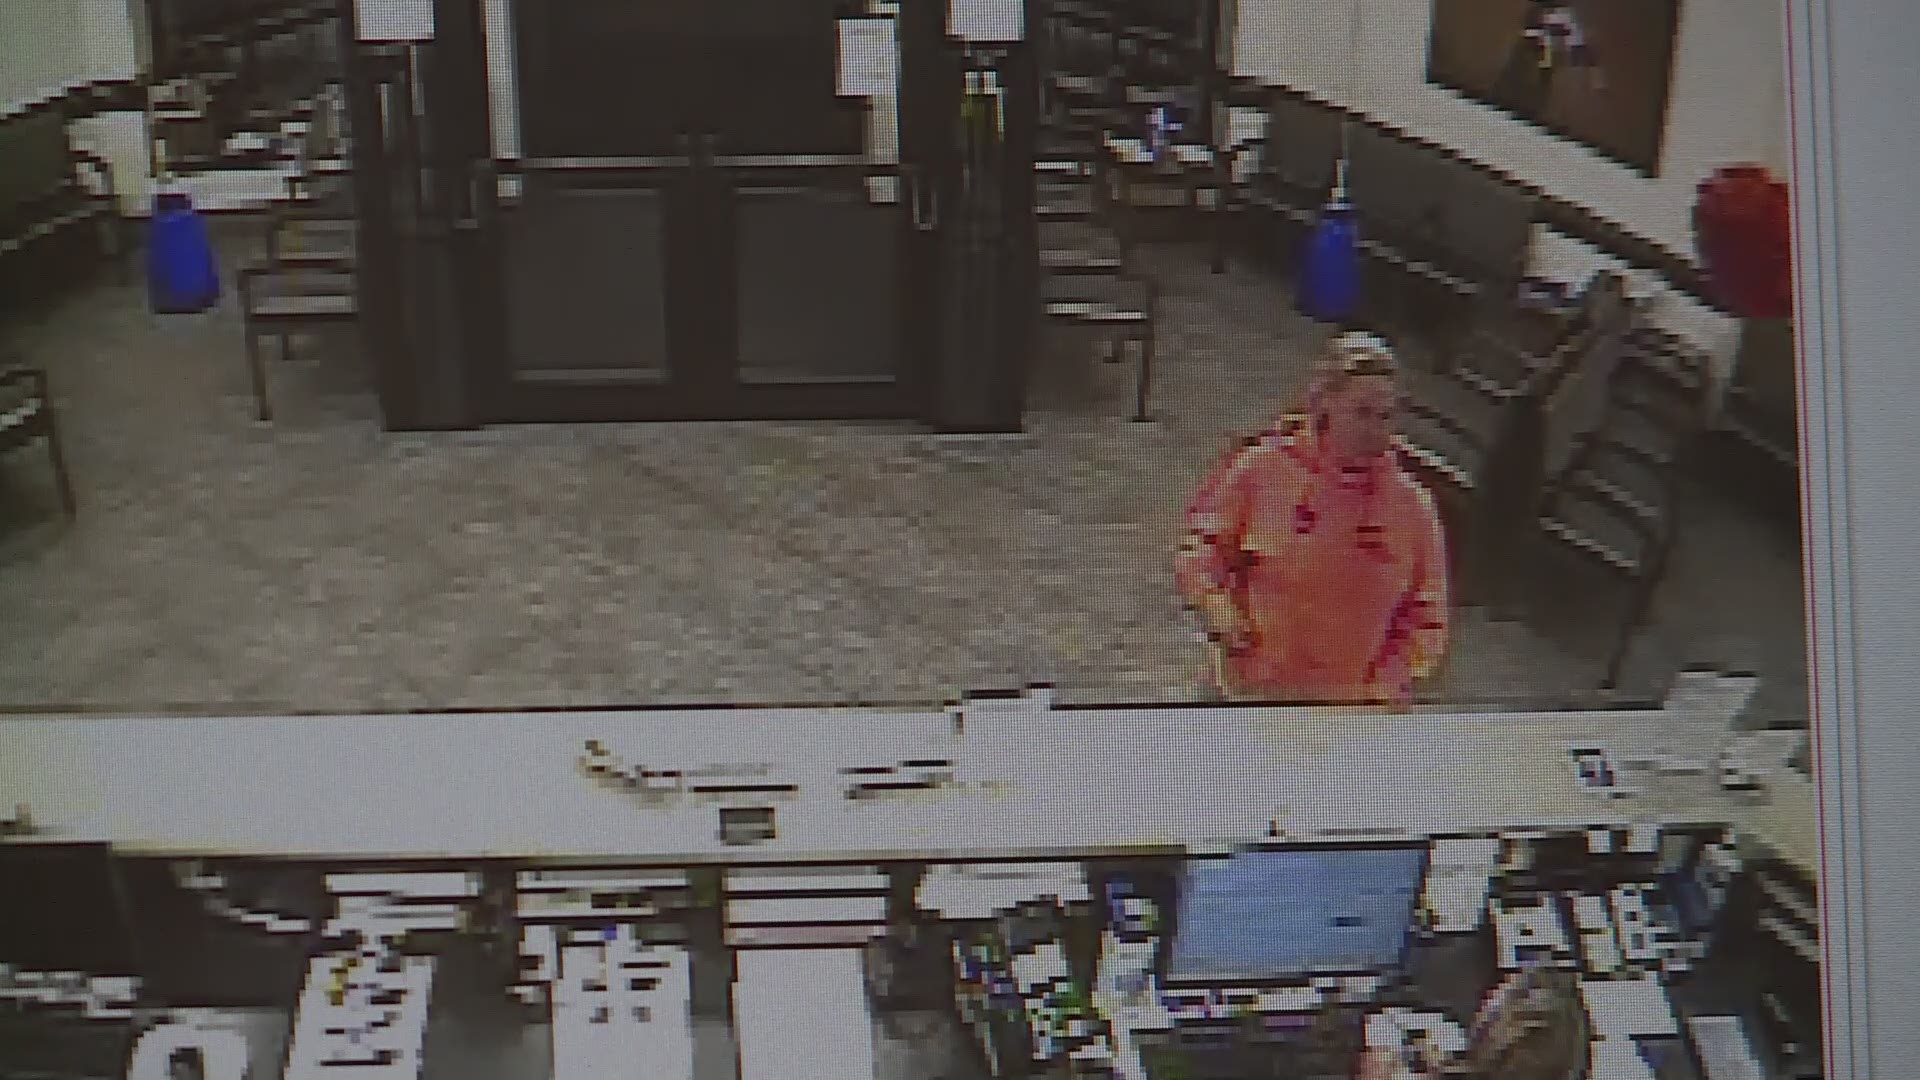 Surveillance video from VCA Great Lakes showed this woman at the counter. It is believed she was the person who later dumped seven cats behind the hospital.